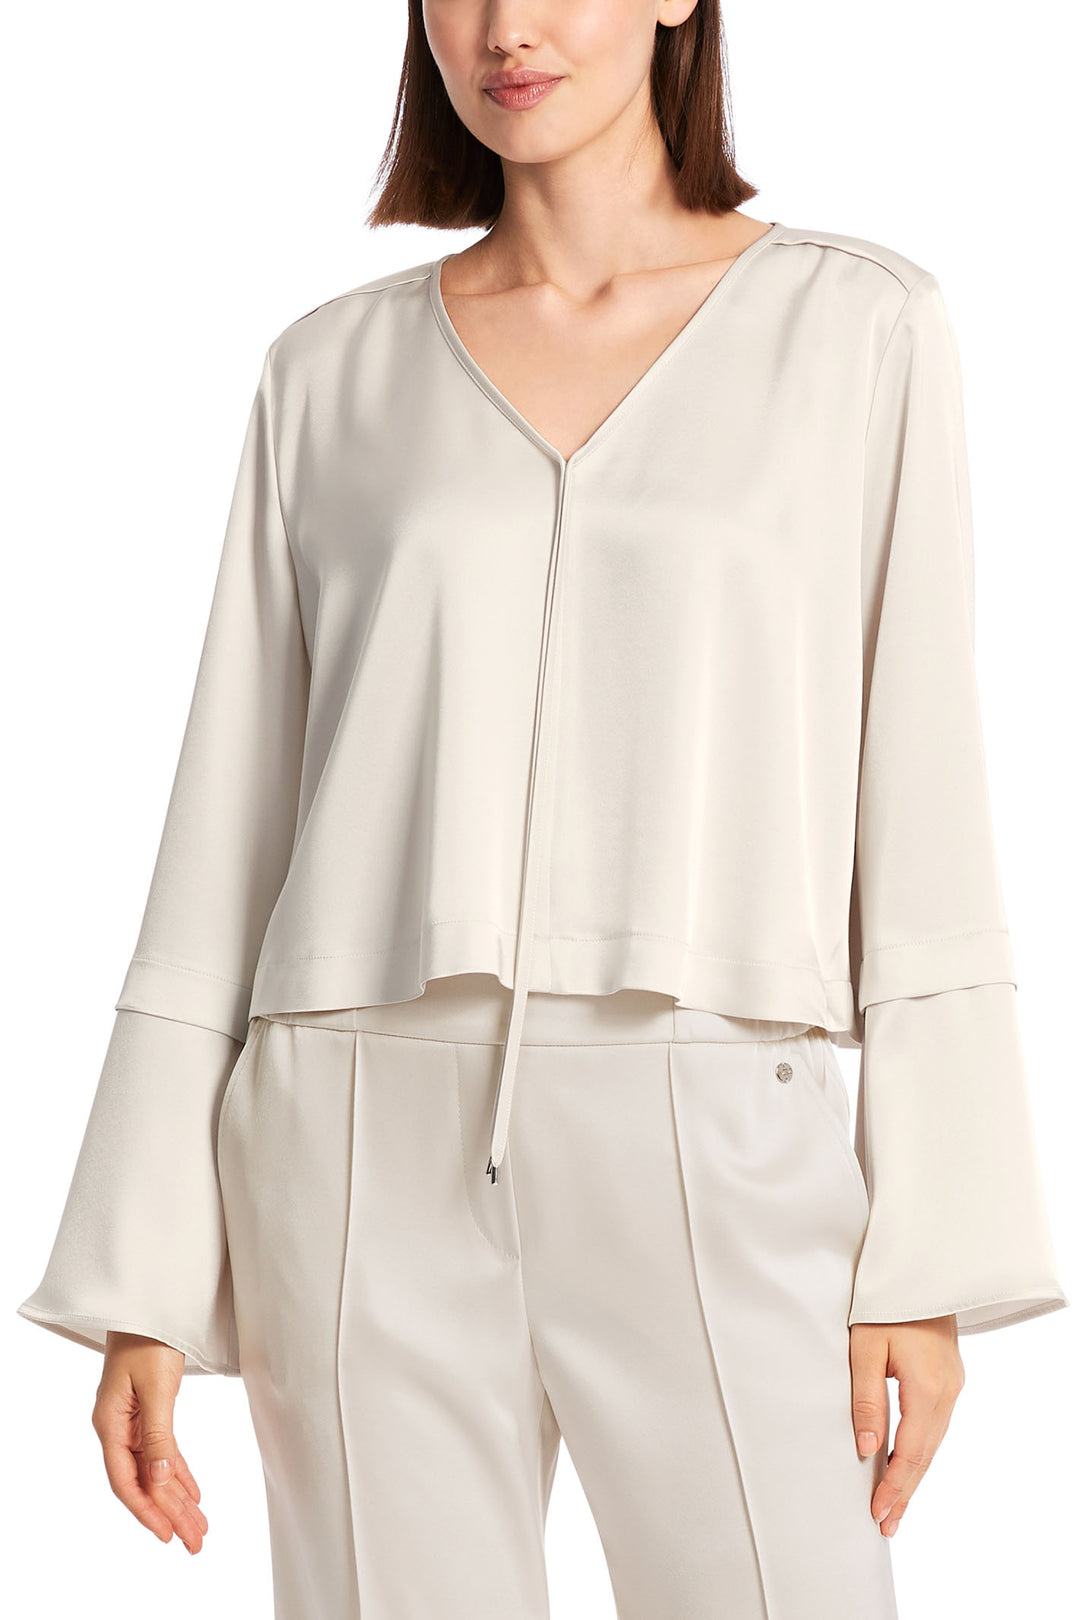 Marc Cain Collection WC 51.22 W15 182 Beige Smoke Cropped Blouse - Olivia Grace Fashion